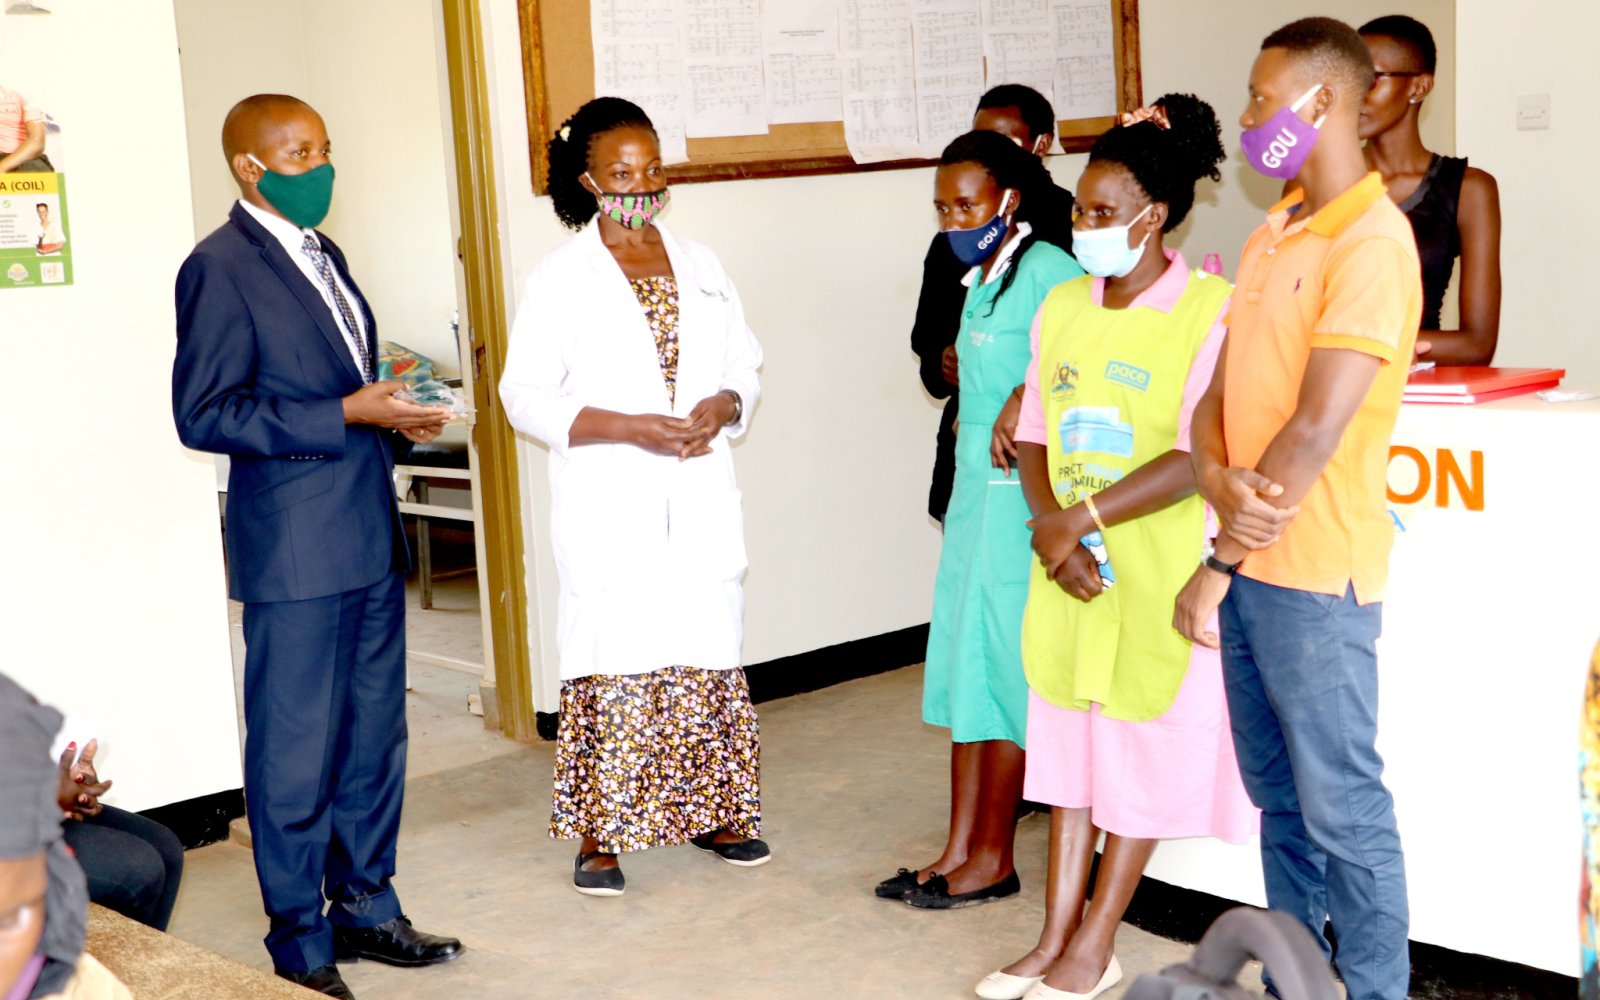 The Coordinator Dr. Geofrey Musinguzi (Left) flanked by the In-charge Seeta-Nazigo HCIII Dr. Jennifer Hajambo (2nd Left) addresses Health Workers during the handover of items donated by the SPICES Uganda Project, MakSPH to Seeta-Nazigo HCIII in Mukono District, Uganda on 21st August 2020. The support will boost the facility's efforts to deal with COVID-19 and CVDs.